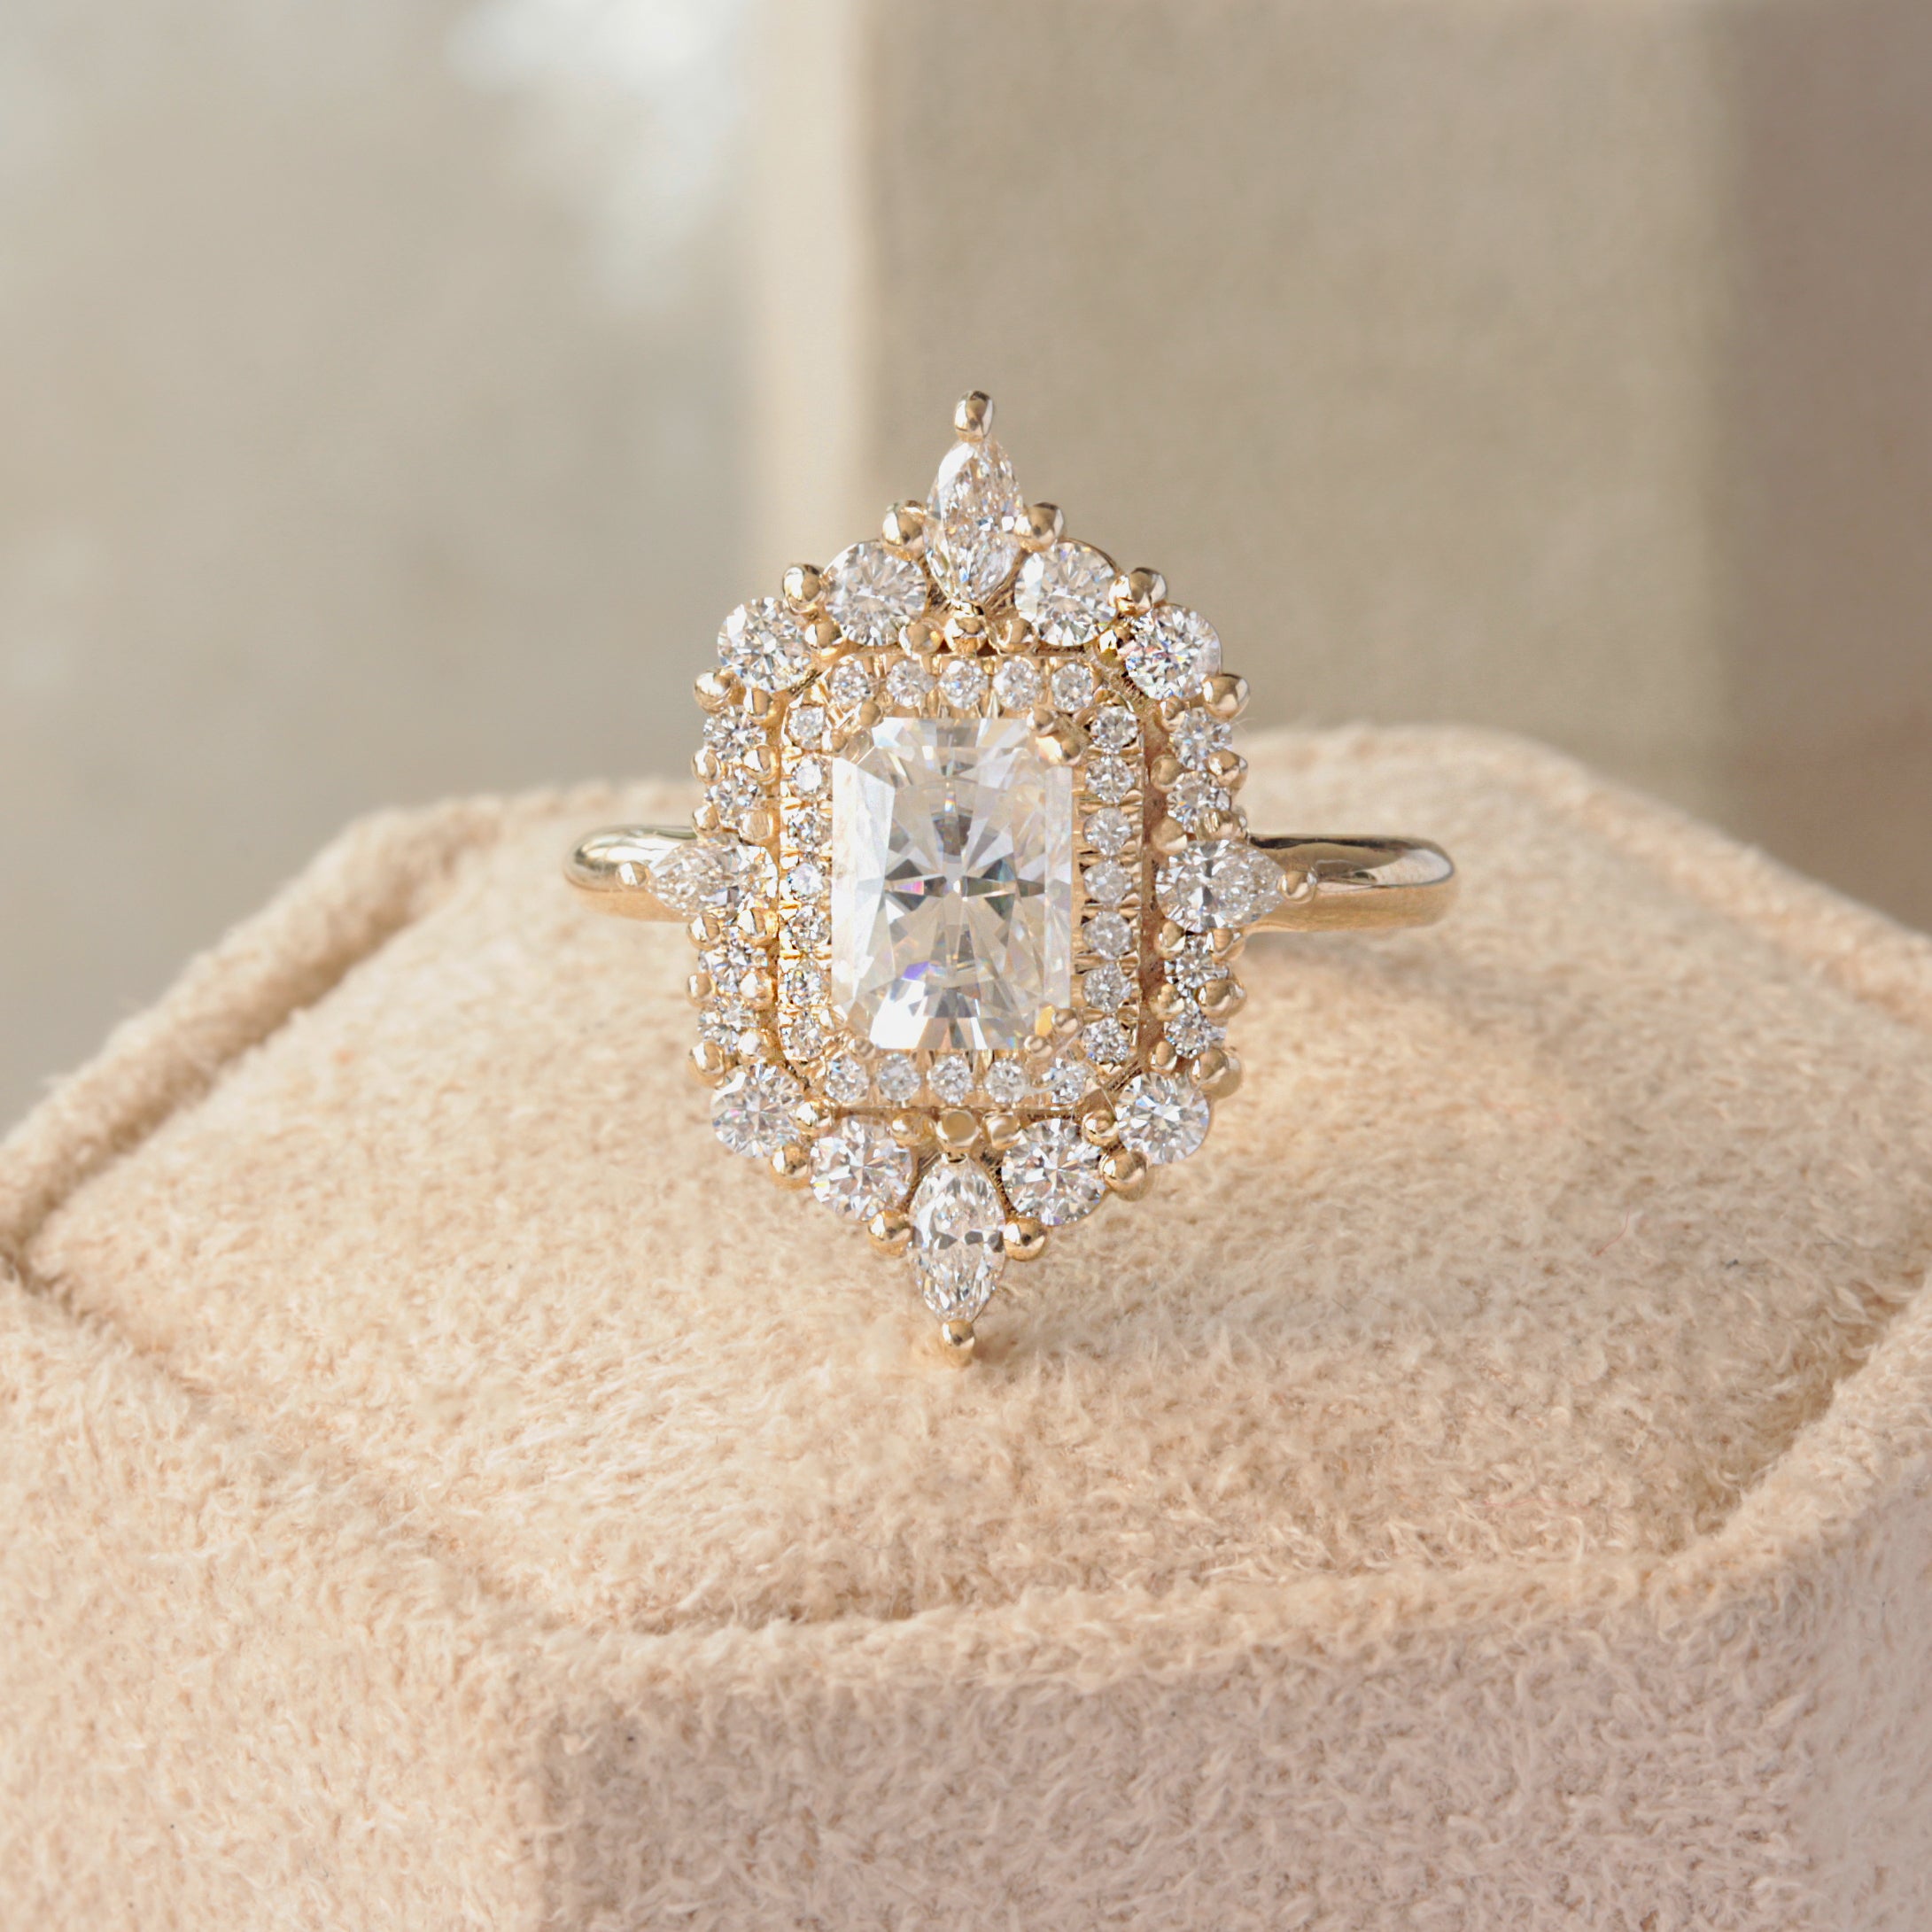 Radiant Cut Double Halo Diamond Engagement Ring "Andy”